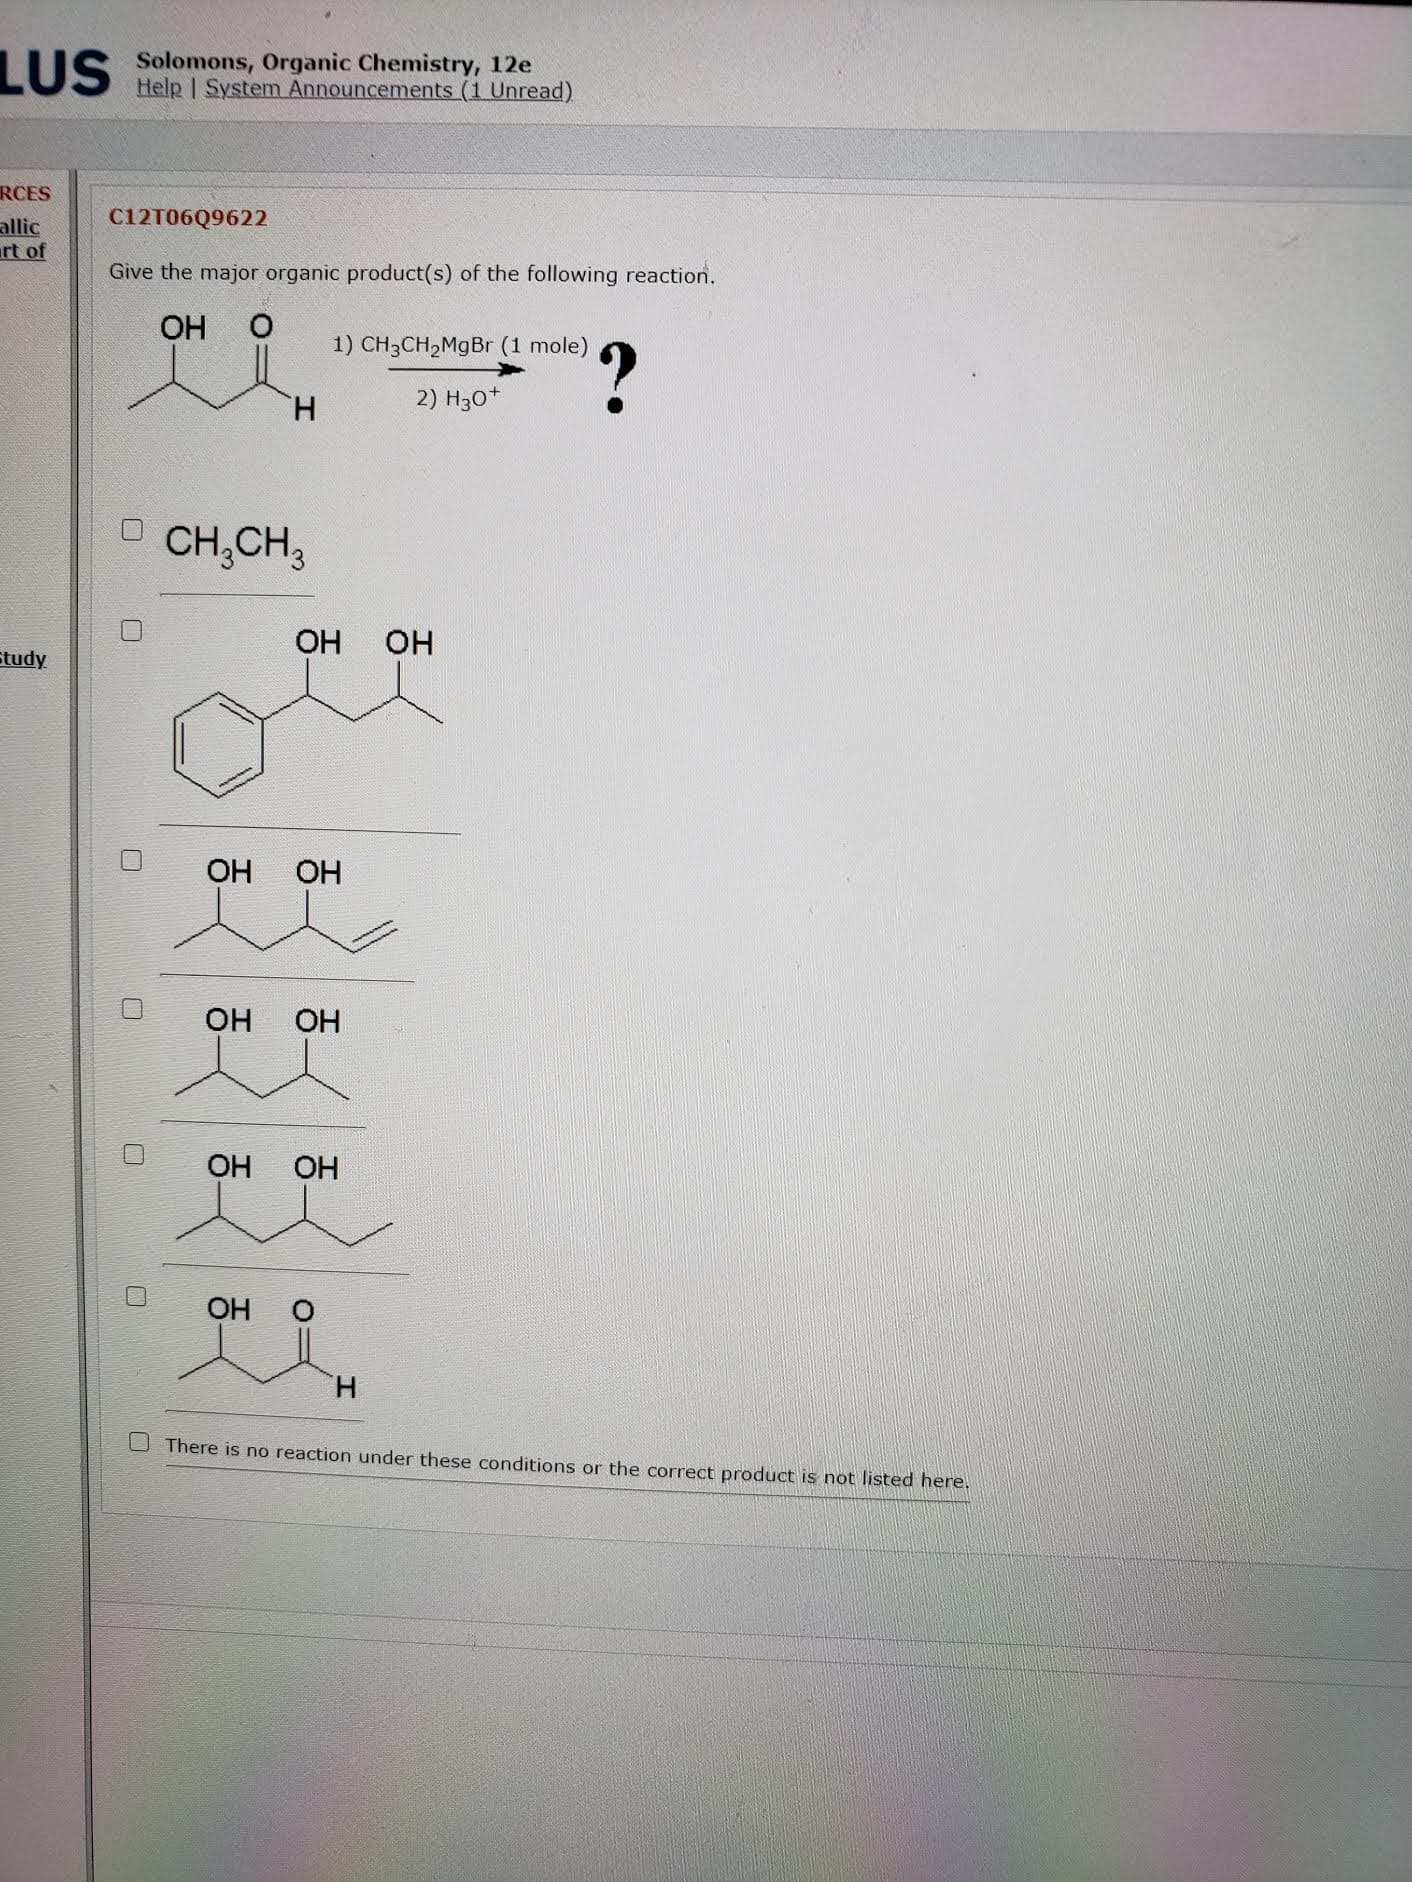 Give the major organic product(s) of the following reaction.
OH
1) CH3CH2M9B (1 mole)
?
H.
2) H30*
CH,CH,
OH
OH
OH
OH
OH
OH
OH
OH
OH
H.
There is no reaction under these conditions or the correct product is not listed here.
